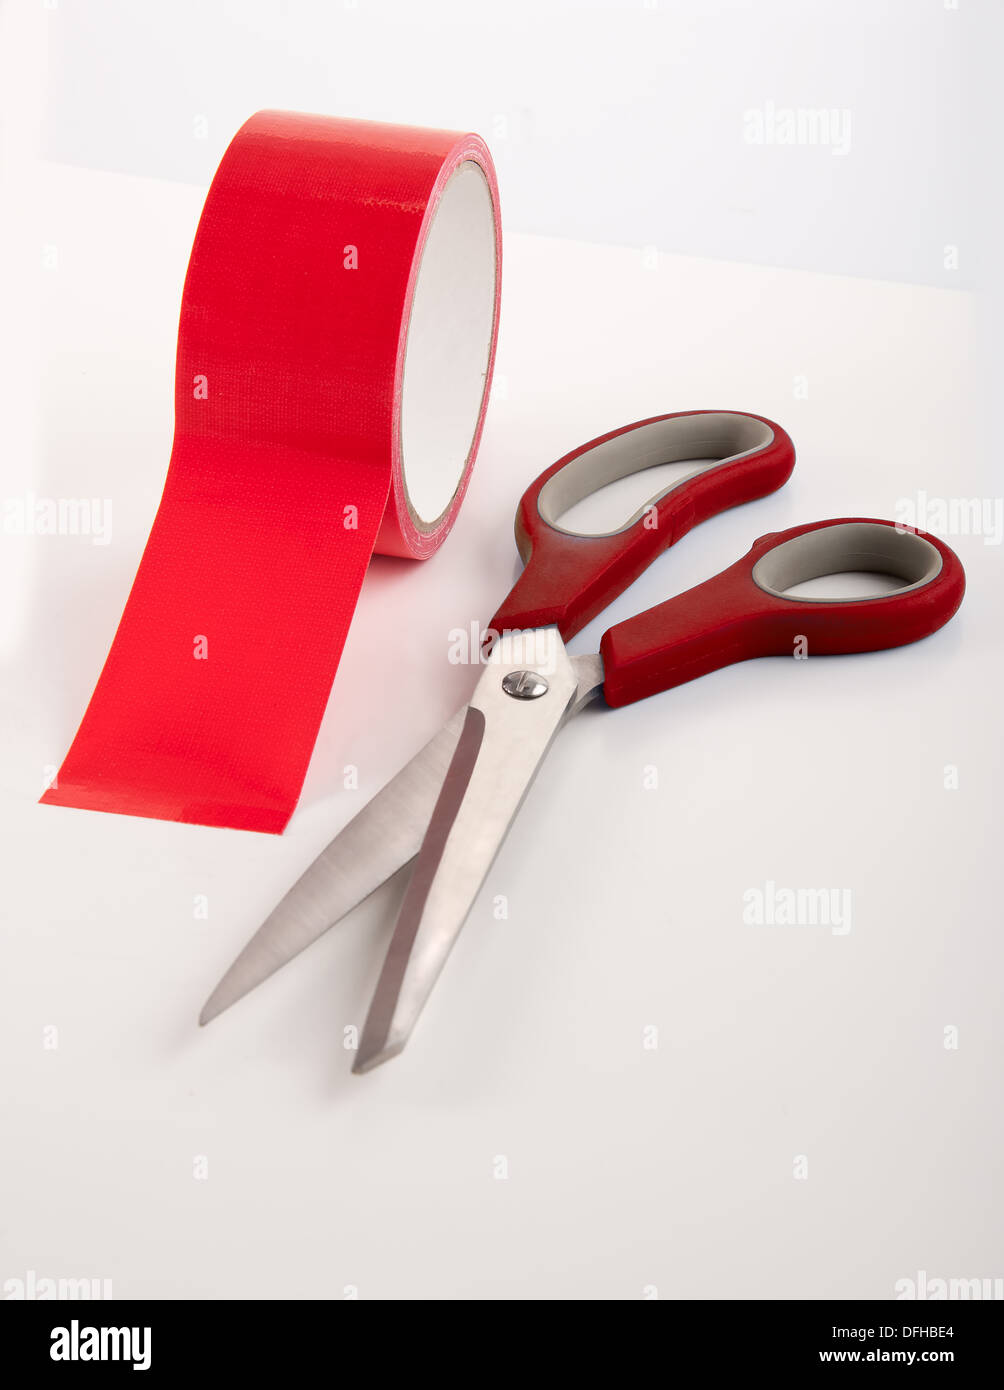 Symbol of cutting red tape of legal matters Stock Photo